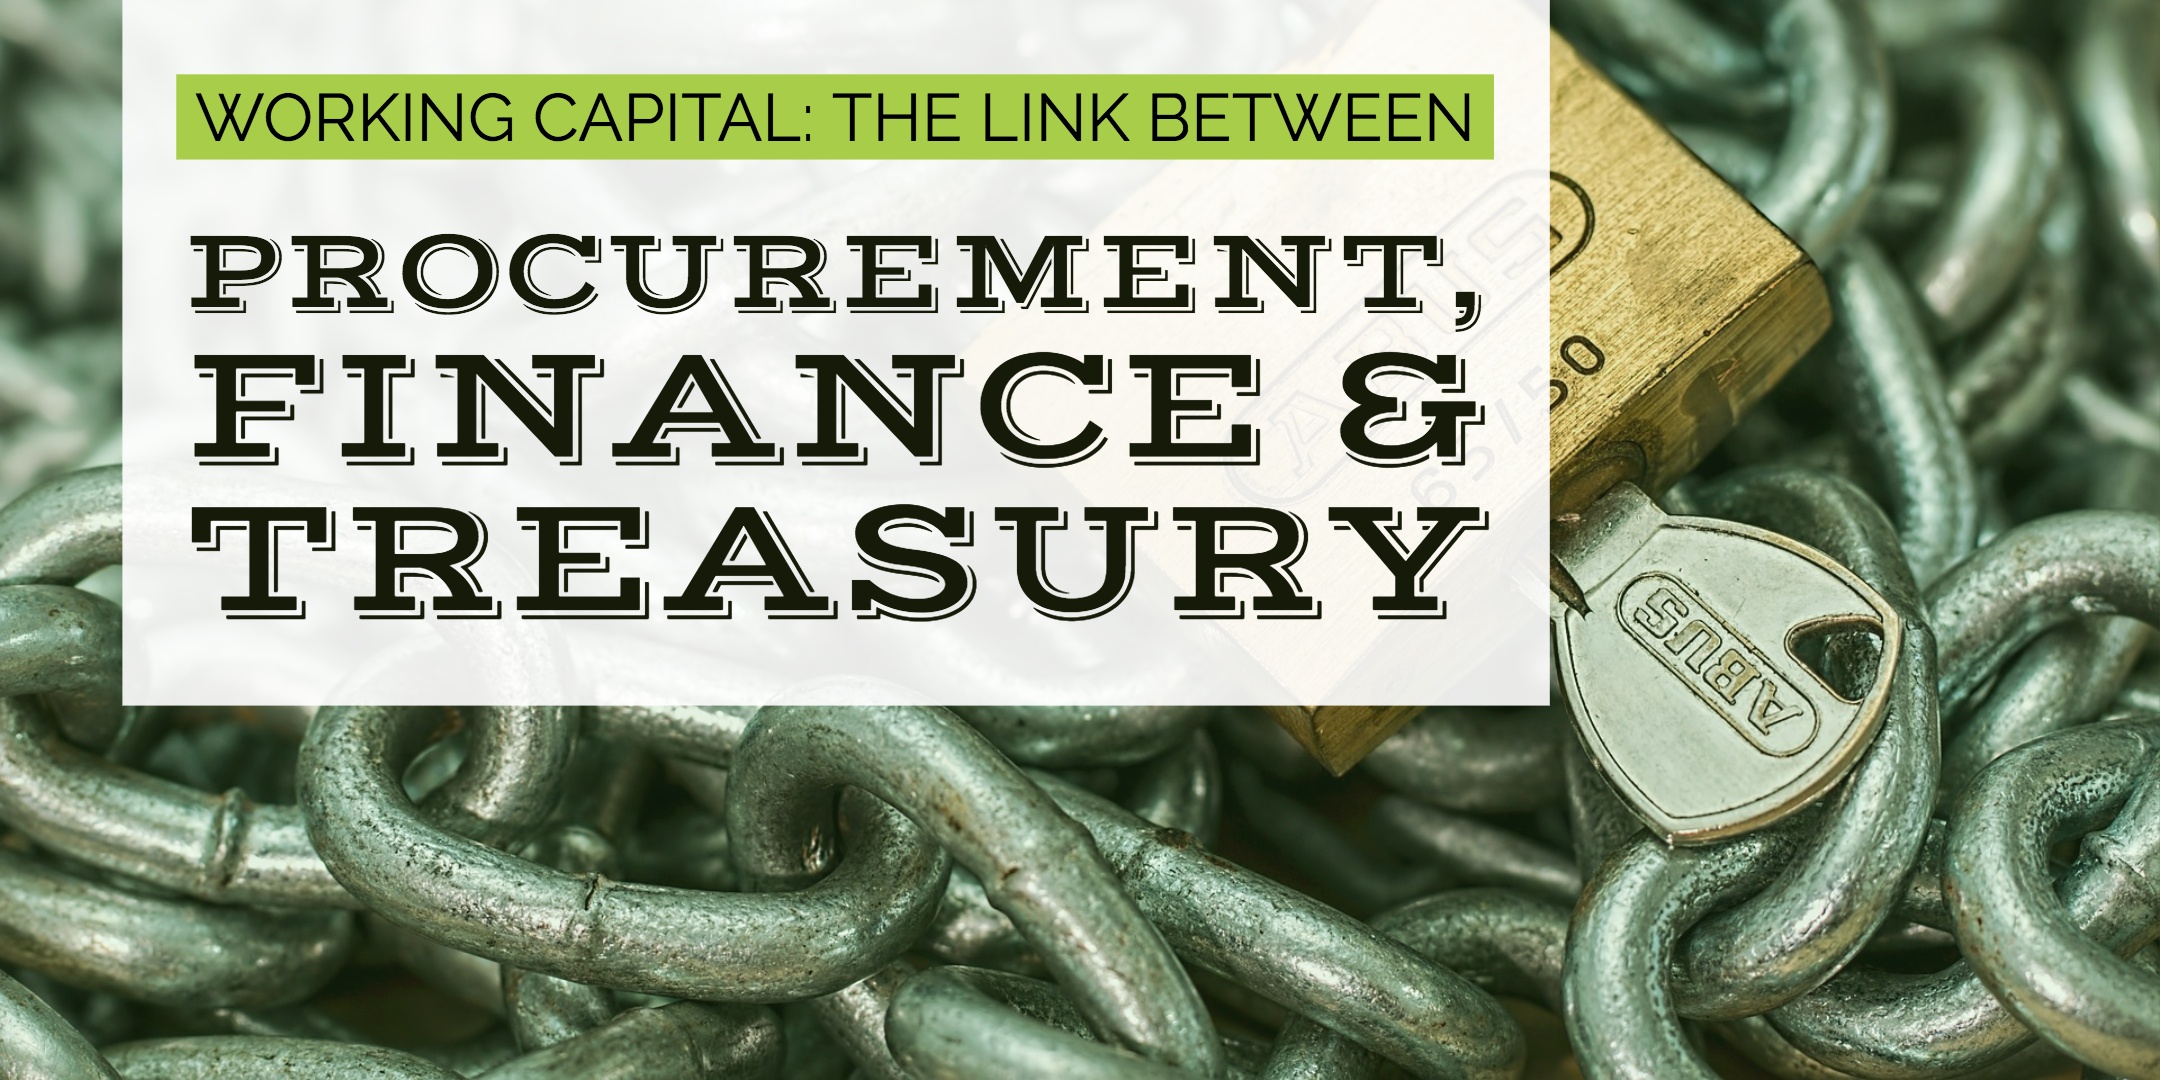 WORKING CAPITAL, THE LINK BETWEEN PROCUREMENT, FINANCE AND TREASURY